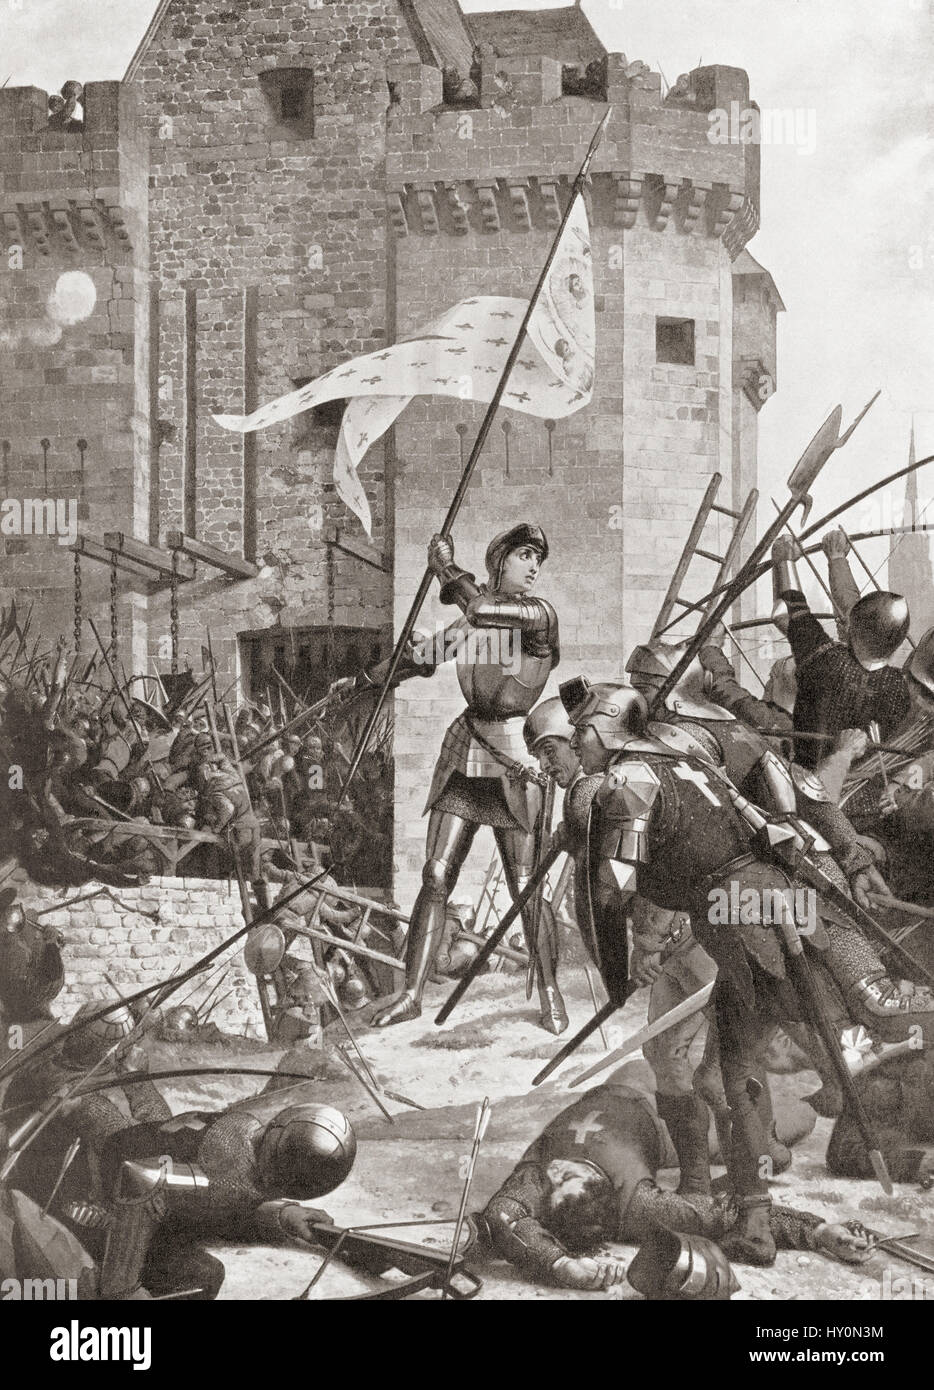 Joan of Arc at the siege of Orleans, May 1429.  Joan of Arc, 1412 - 1431, aka Jeanne d'Arc or Jeanne la Pucelle.  French heroine and martyr. From Hutchinson's History of the Nations, published 1915. Stock Photo